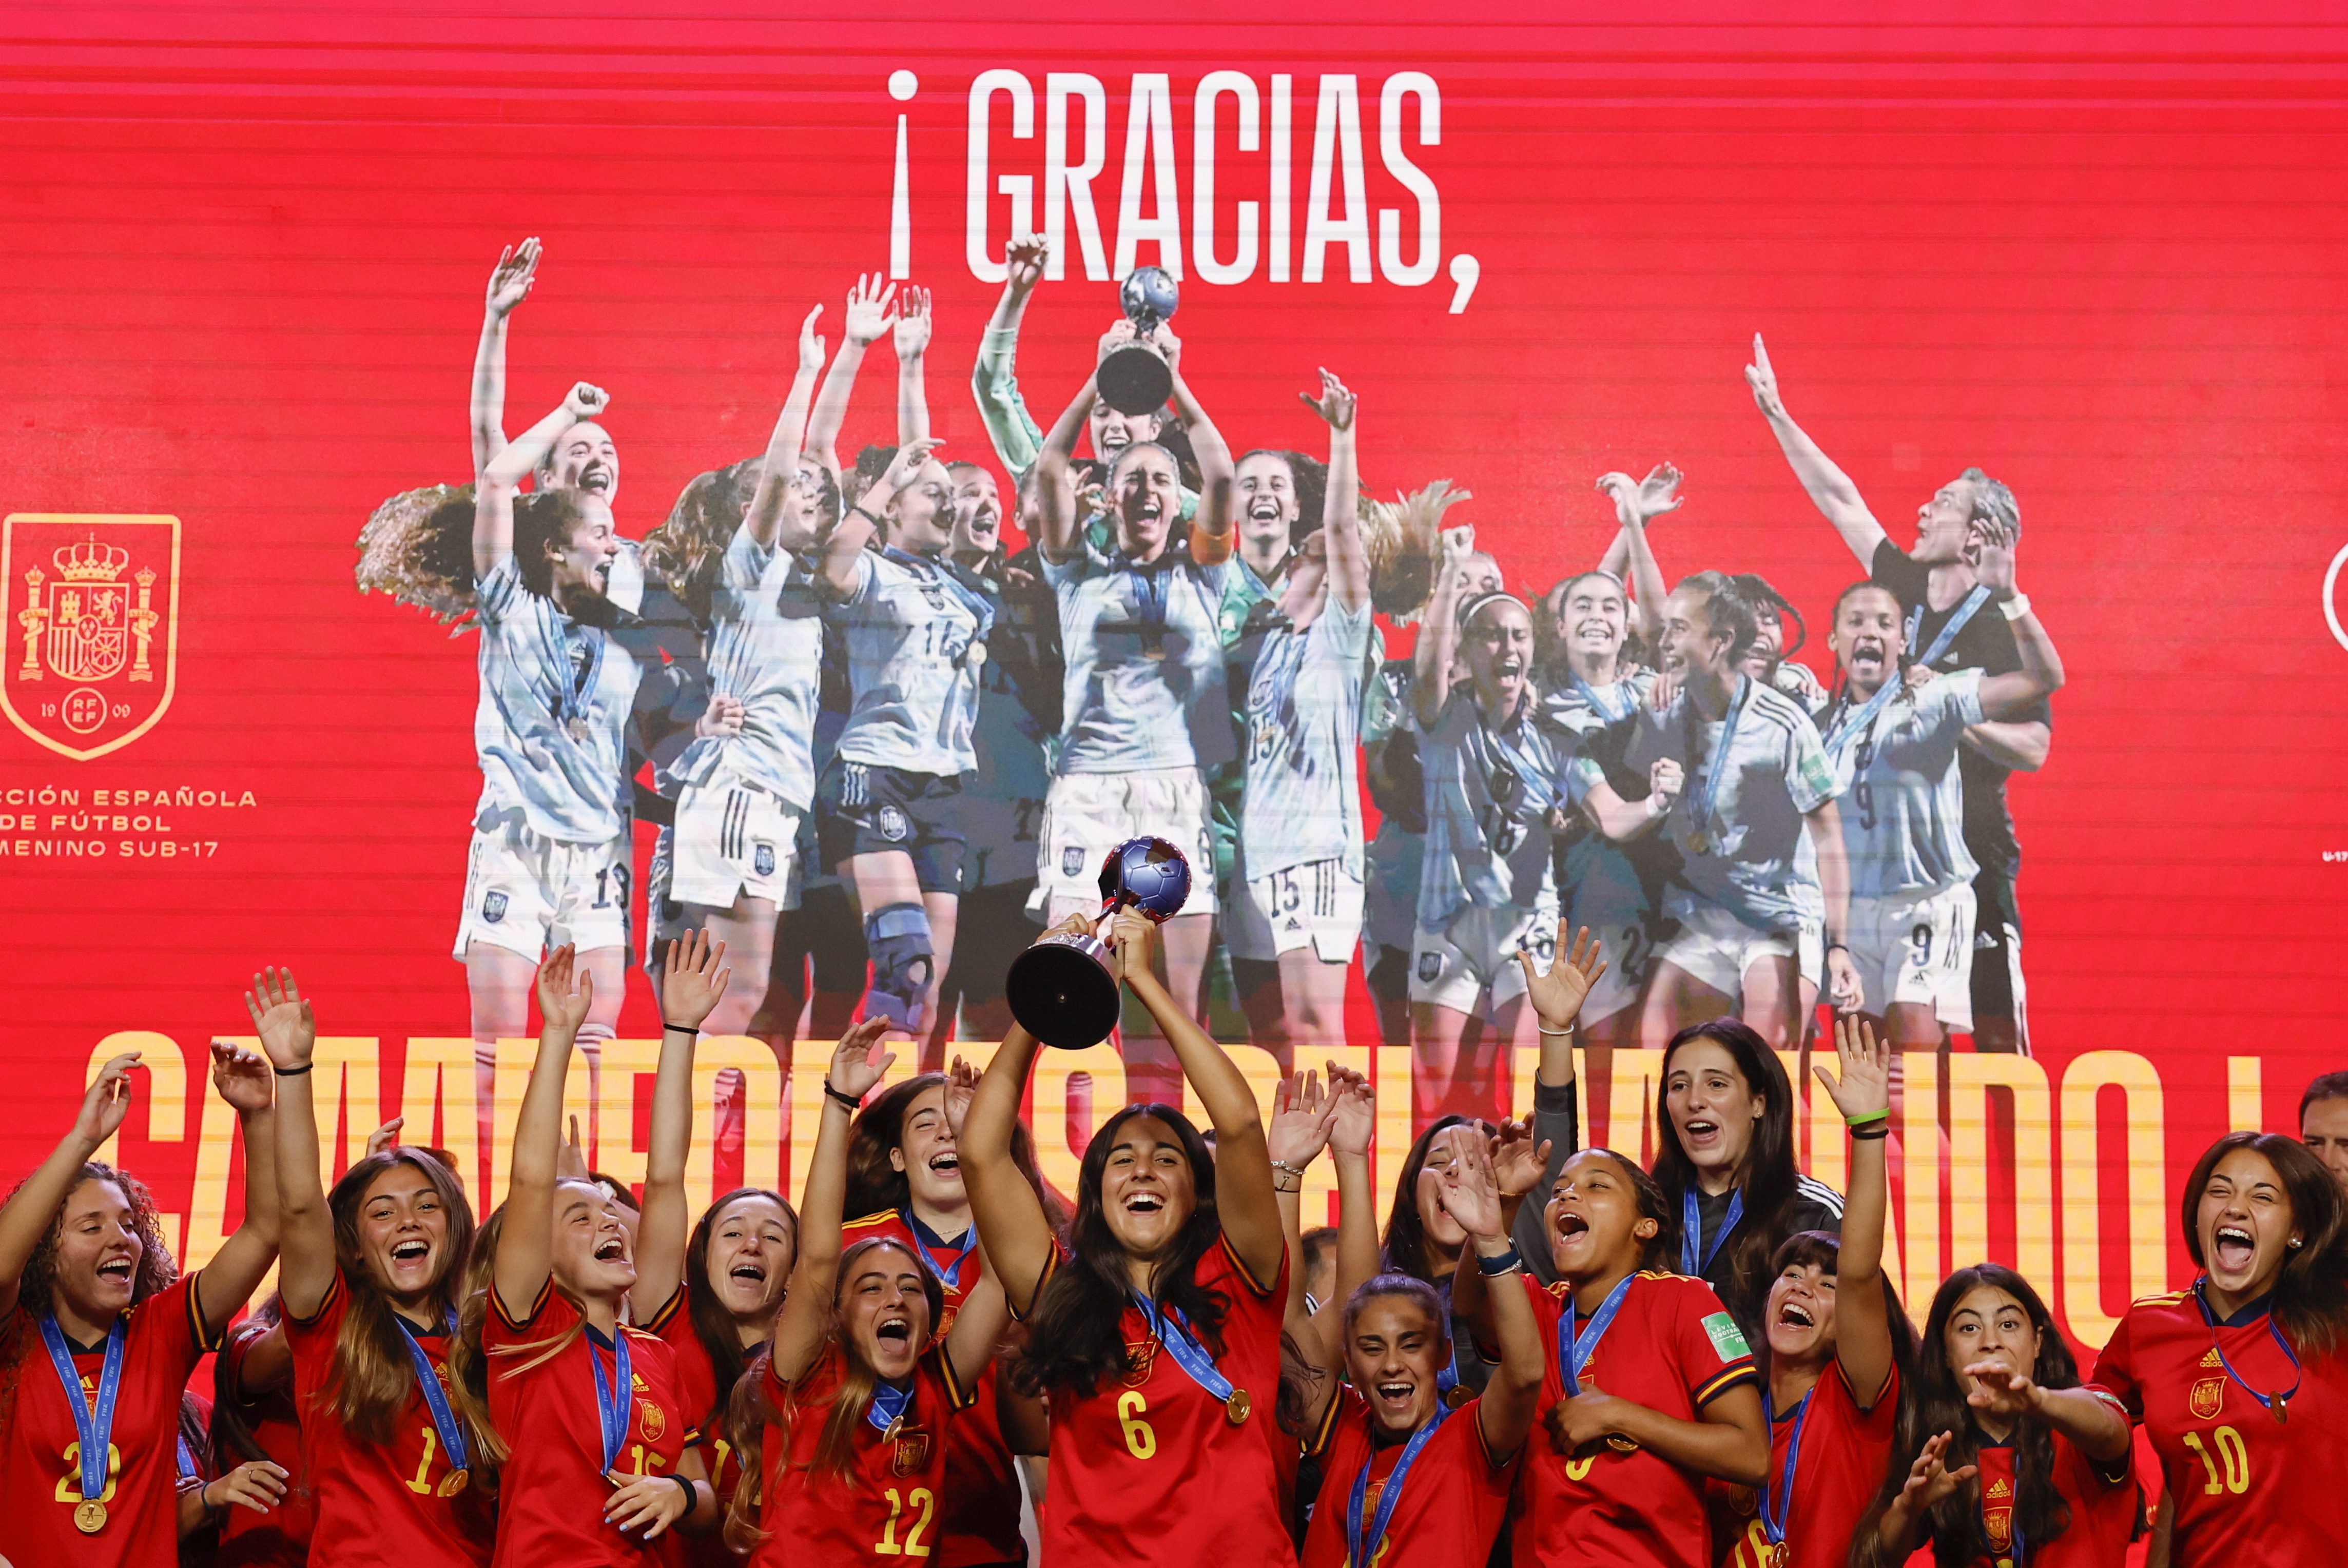 The components of the Sub17 celebrate their great triumph at the RFEF.